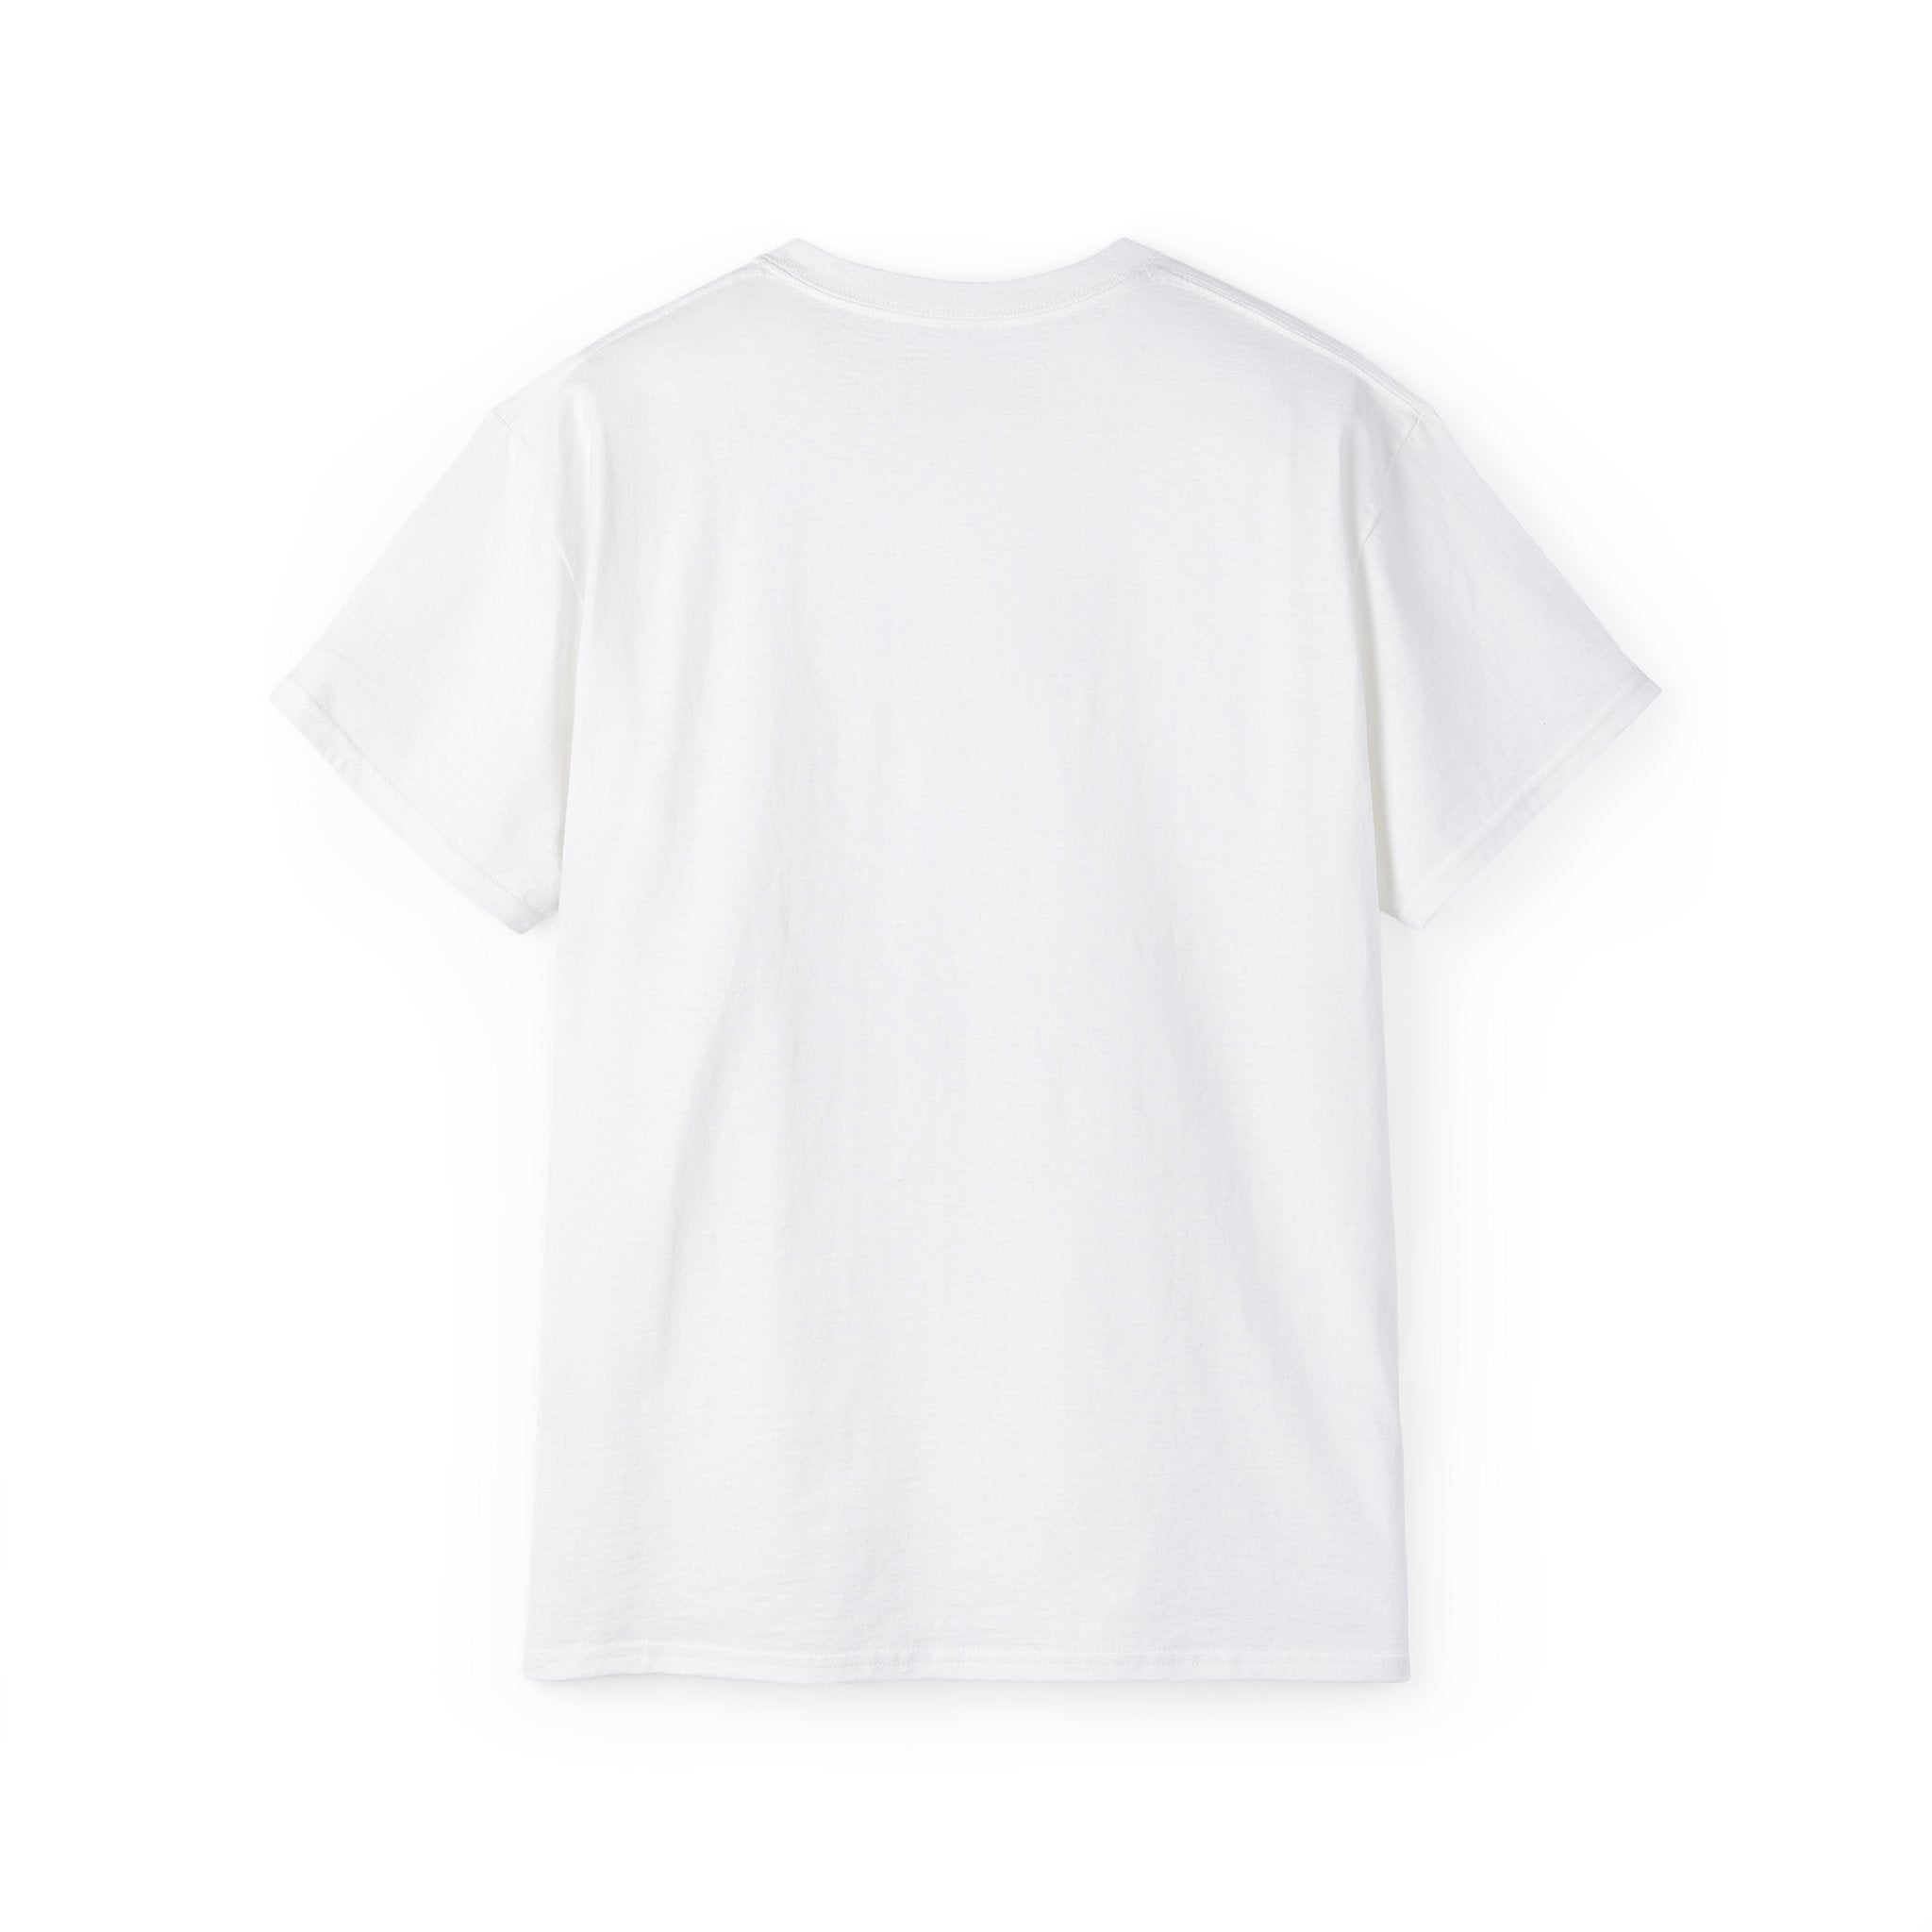 Back view of white tee shirt